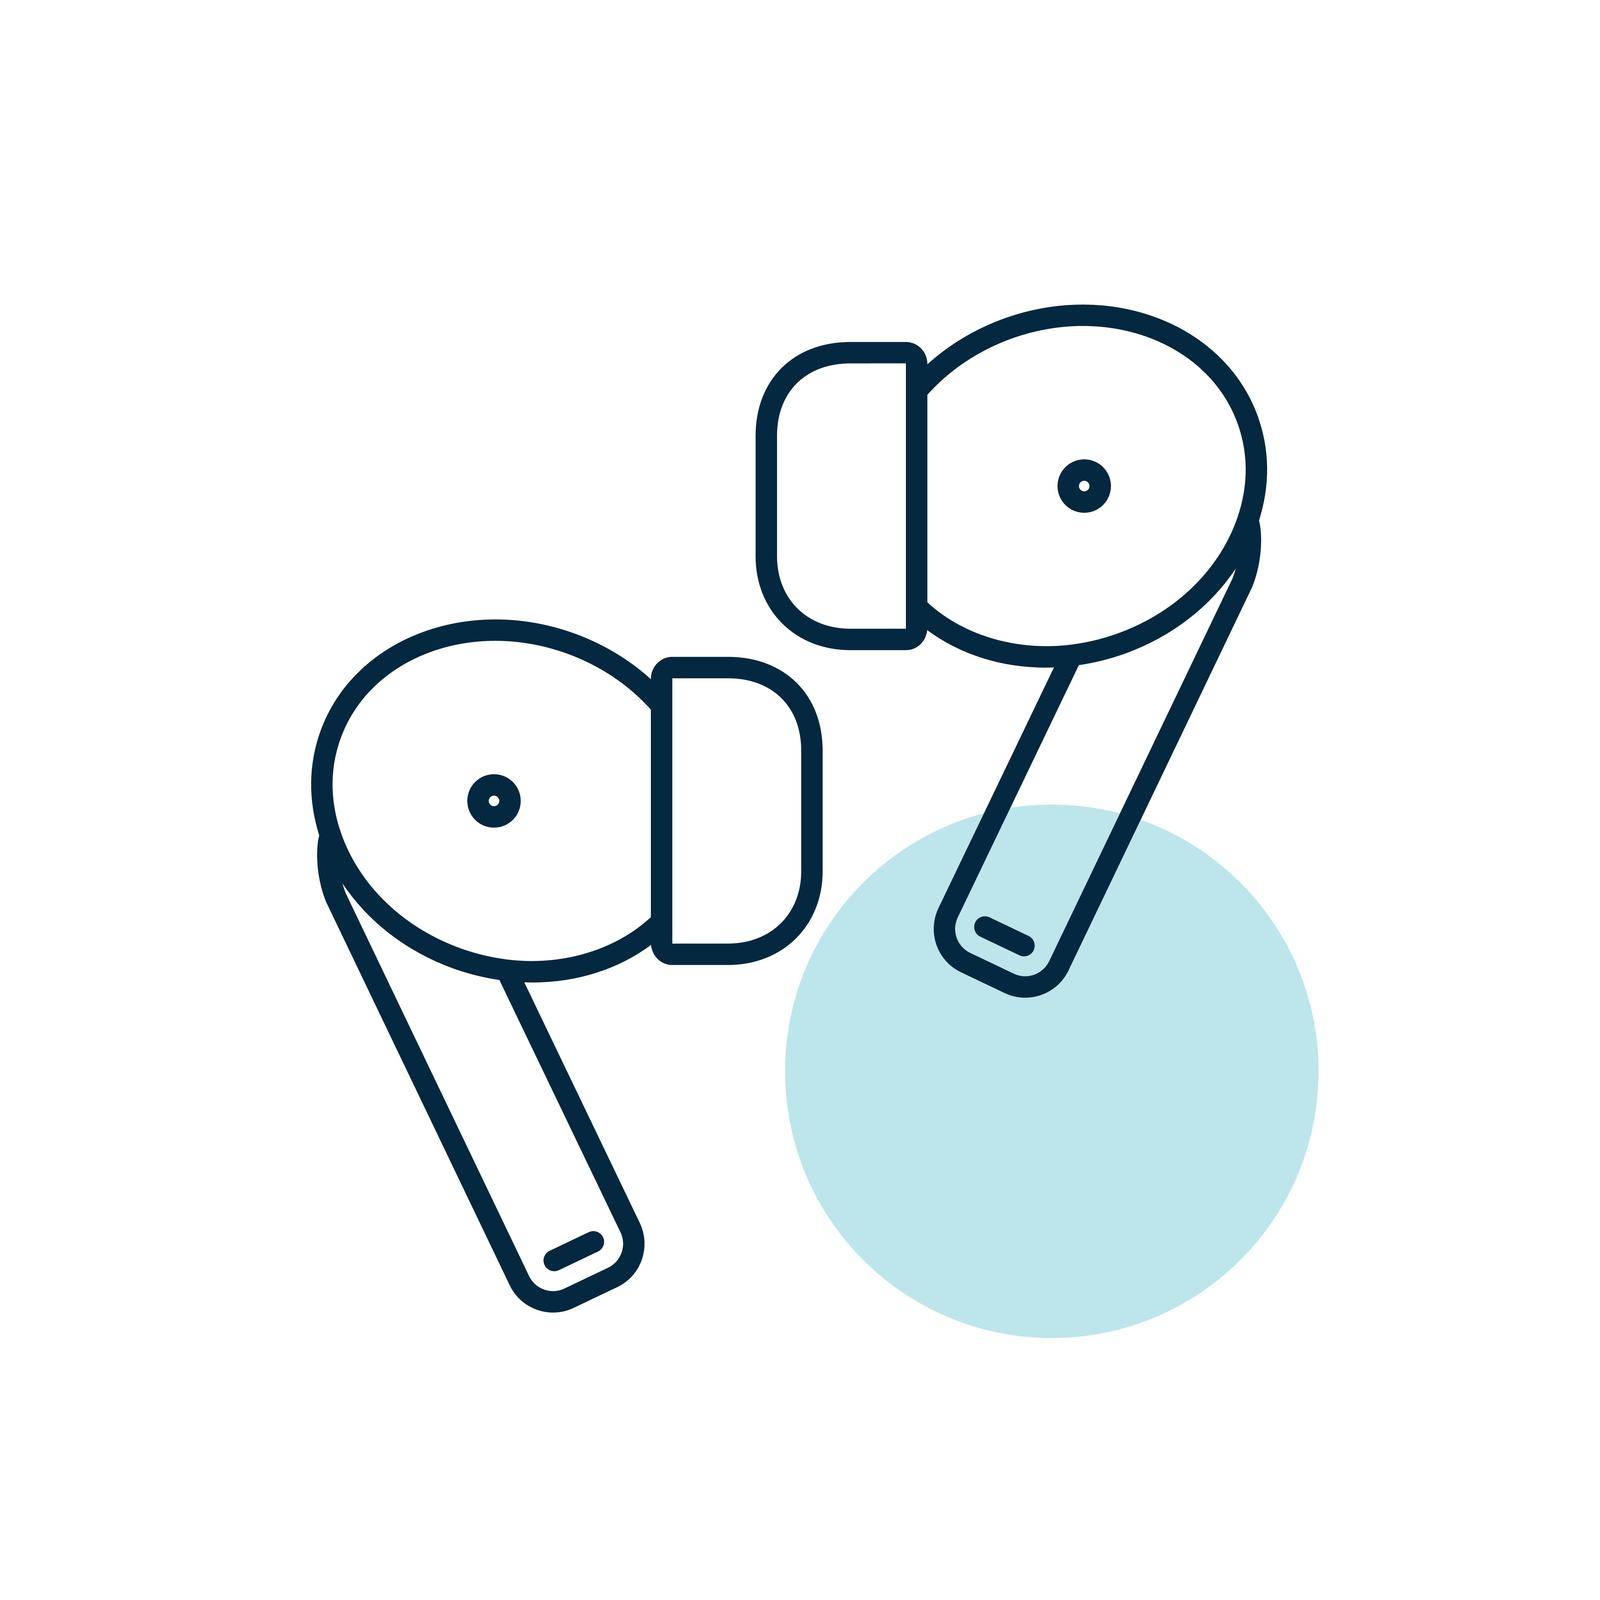 Pair of wireless earbud headphones vector icon. Graph symbol for music and sound web site and apps design, logo, app, UI